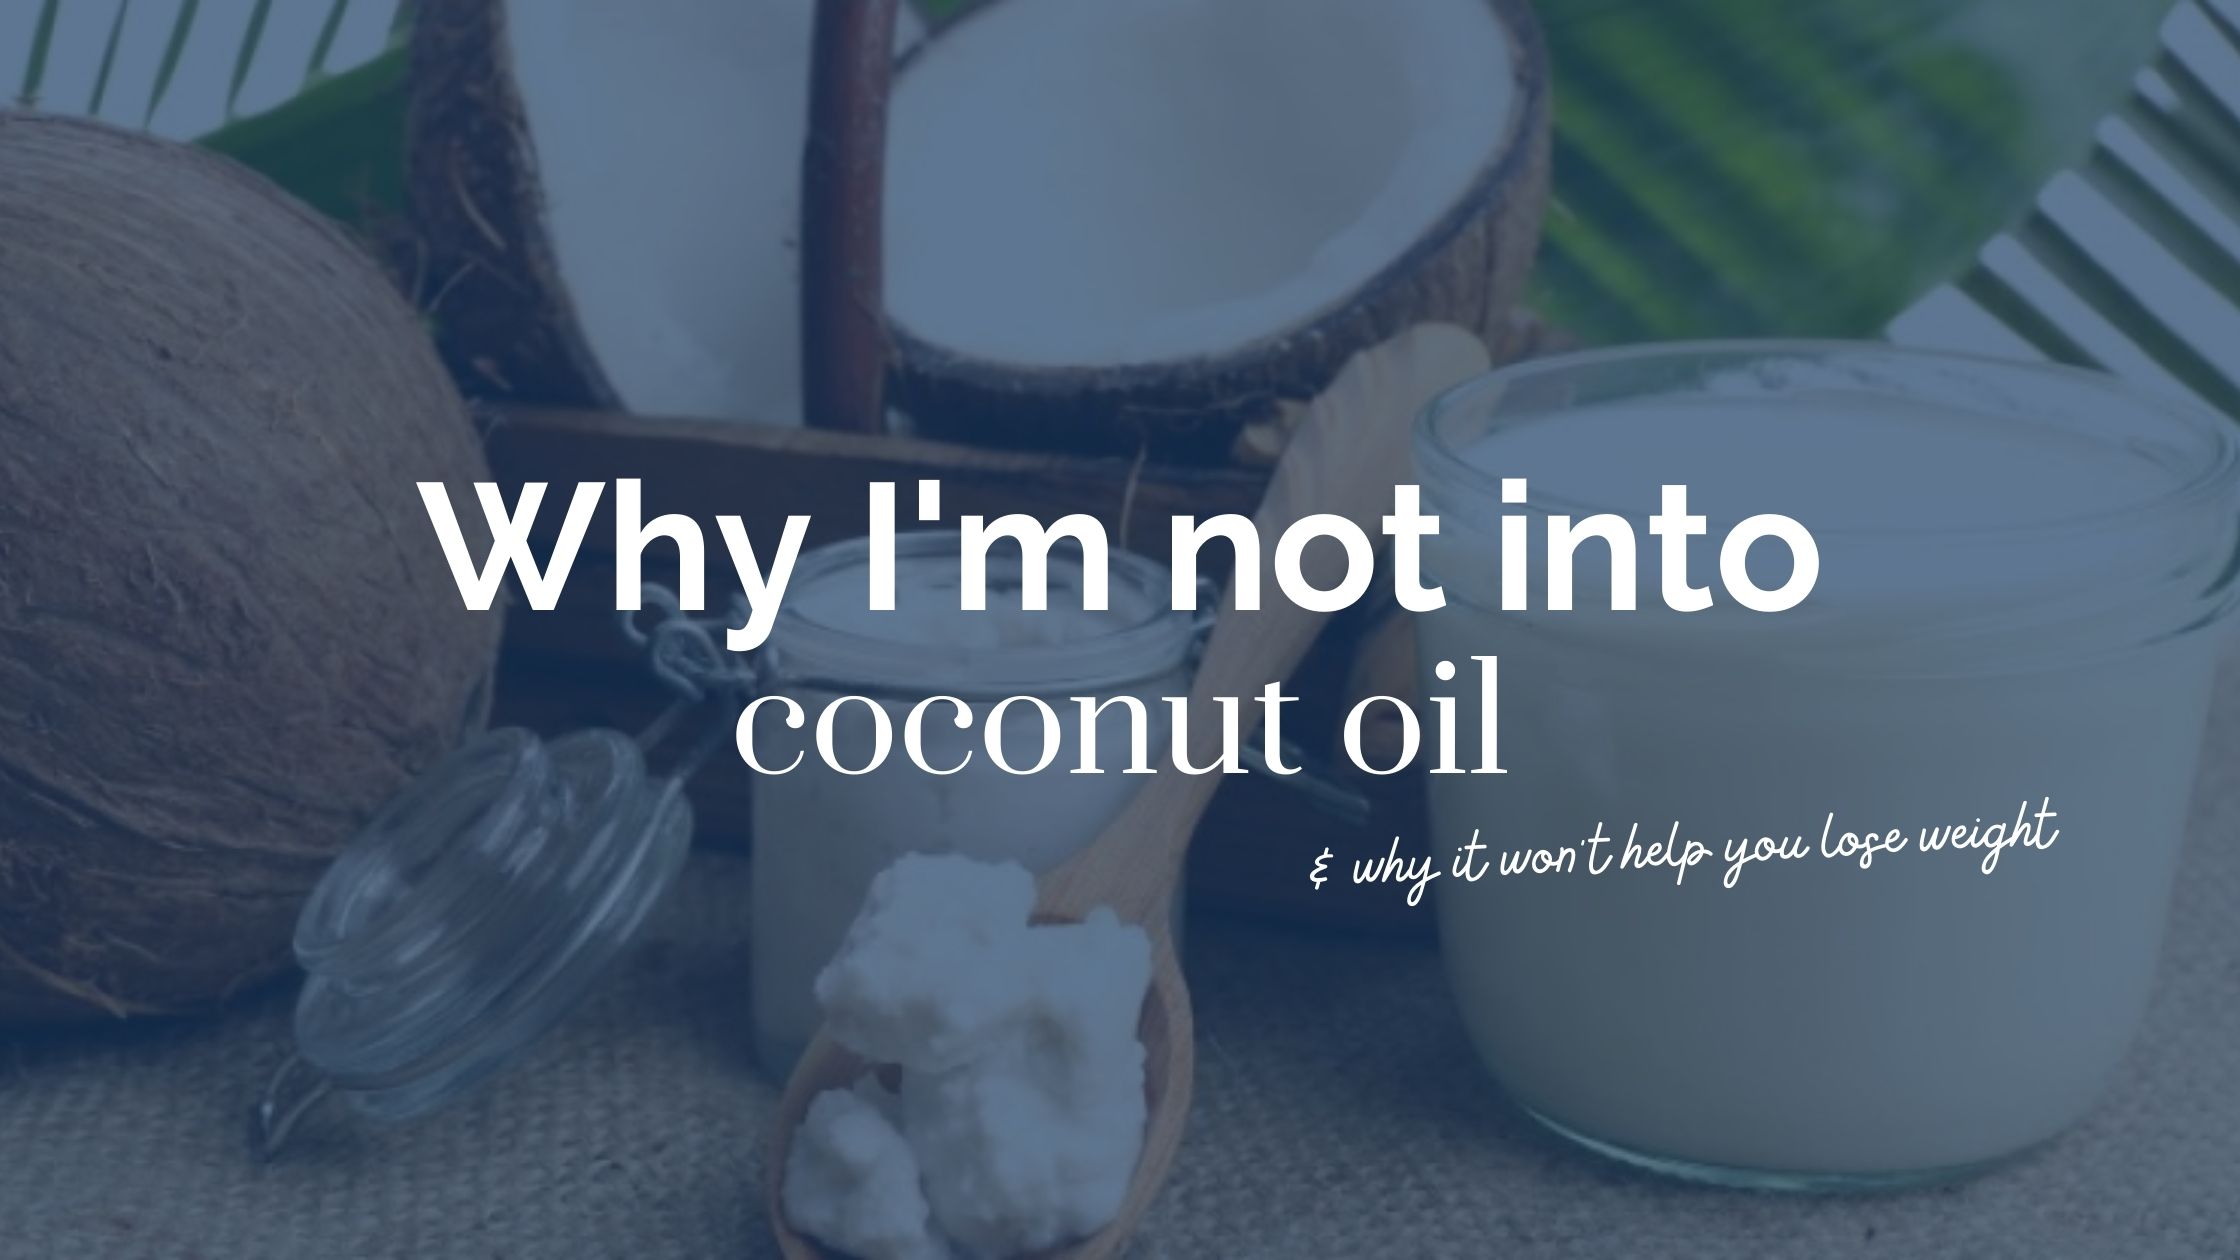 Why I don’t use coconut oil